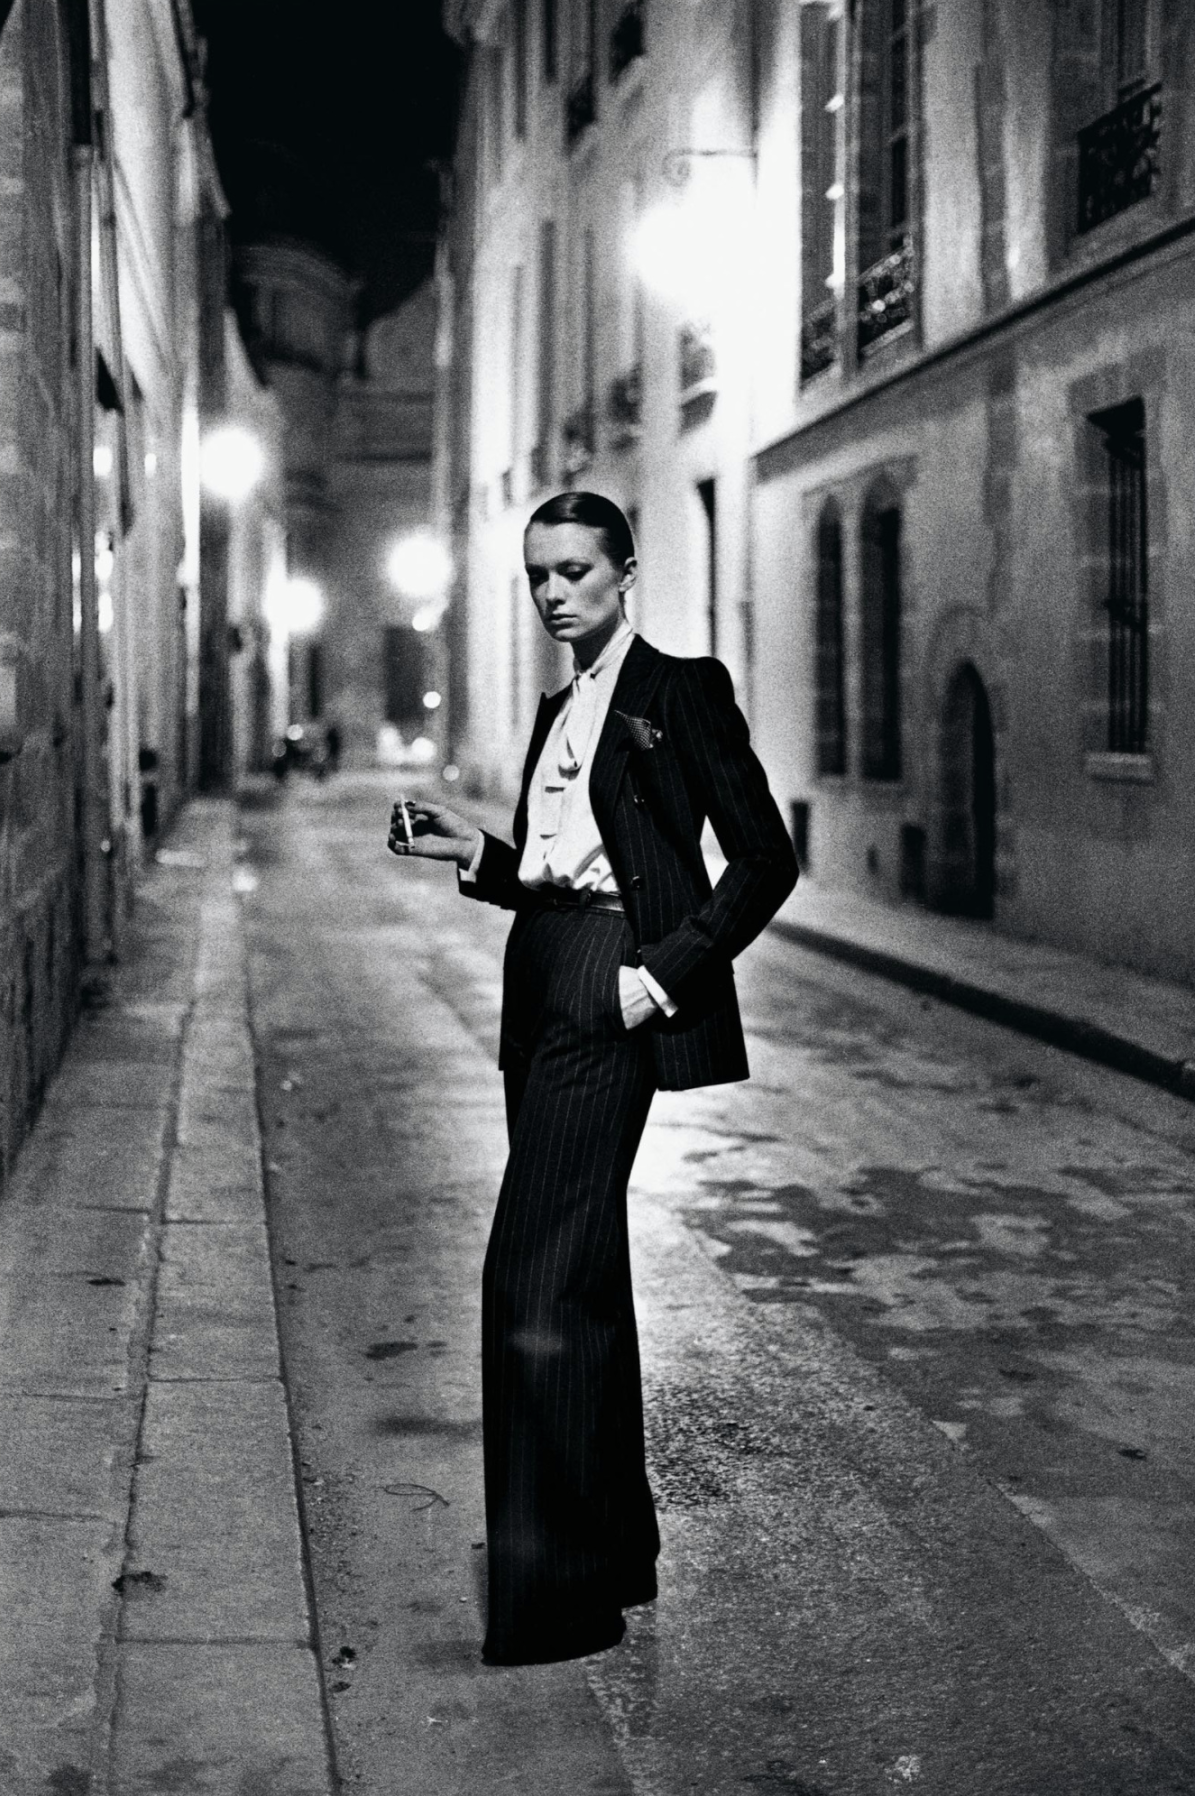 Woman in a tuxedo standing in a street at night, smoking a cigarette